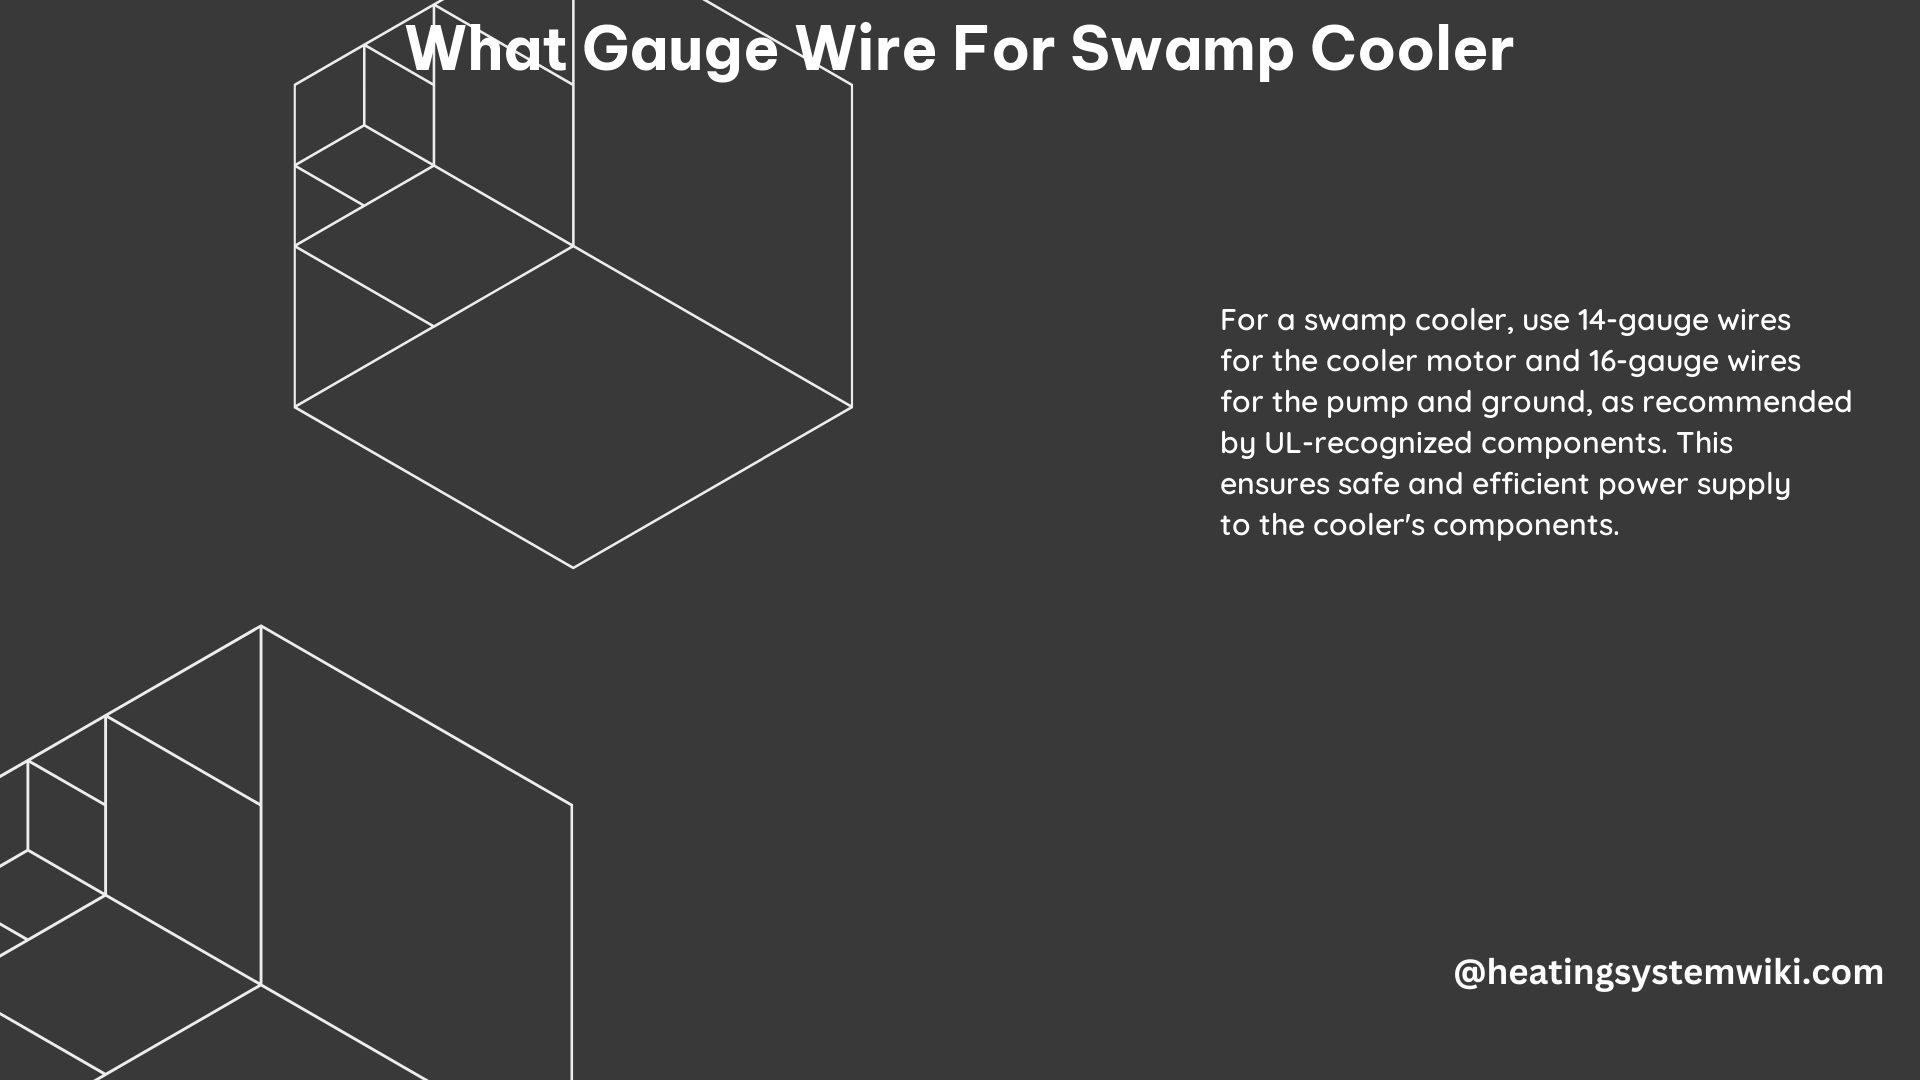 What Gauge Wire for Swamp Cooler